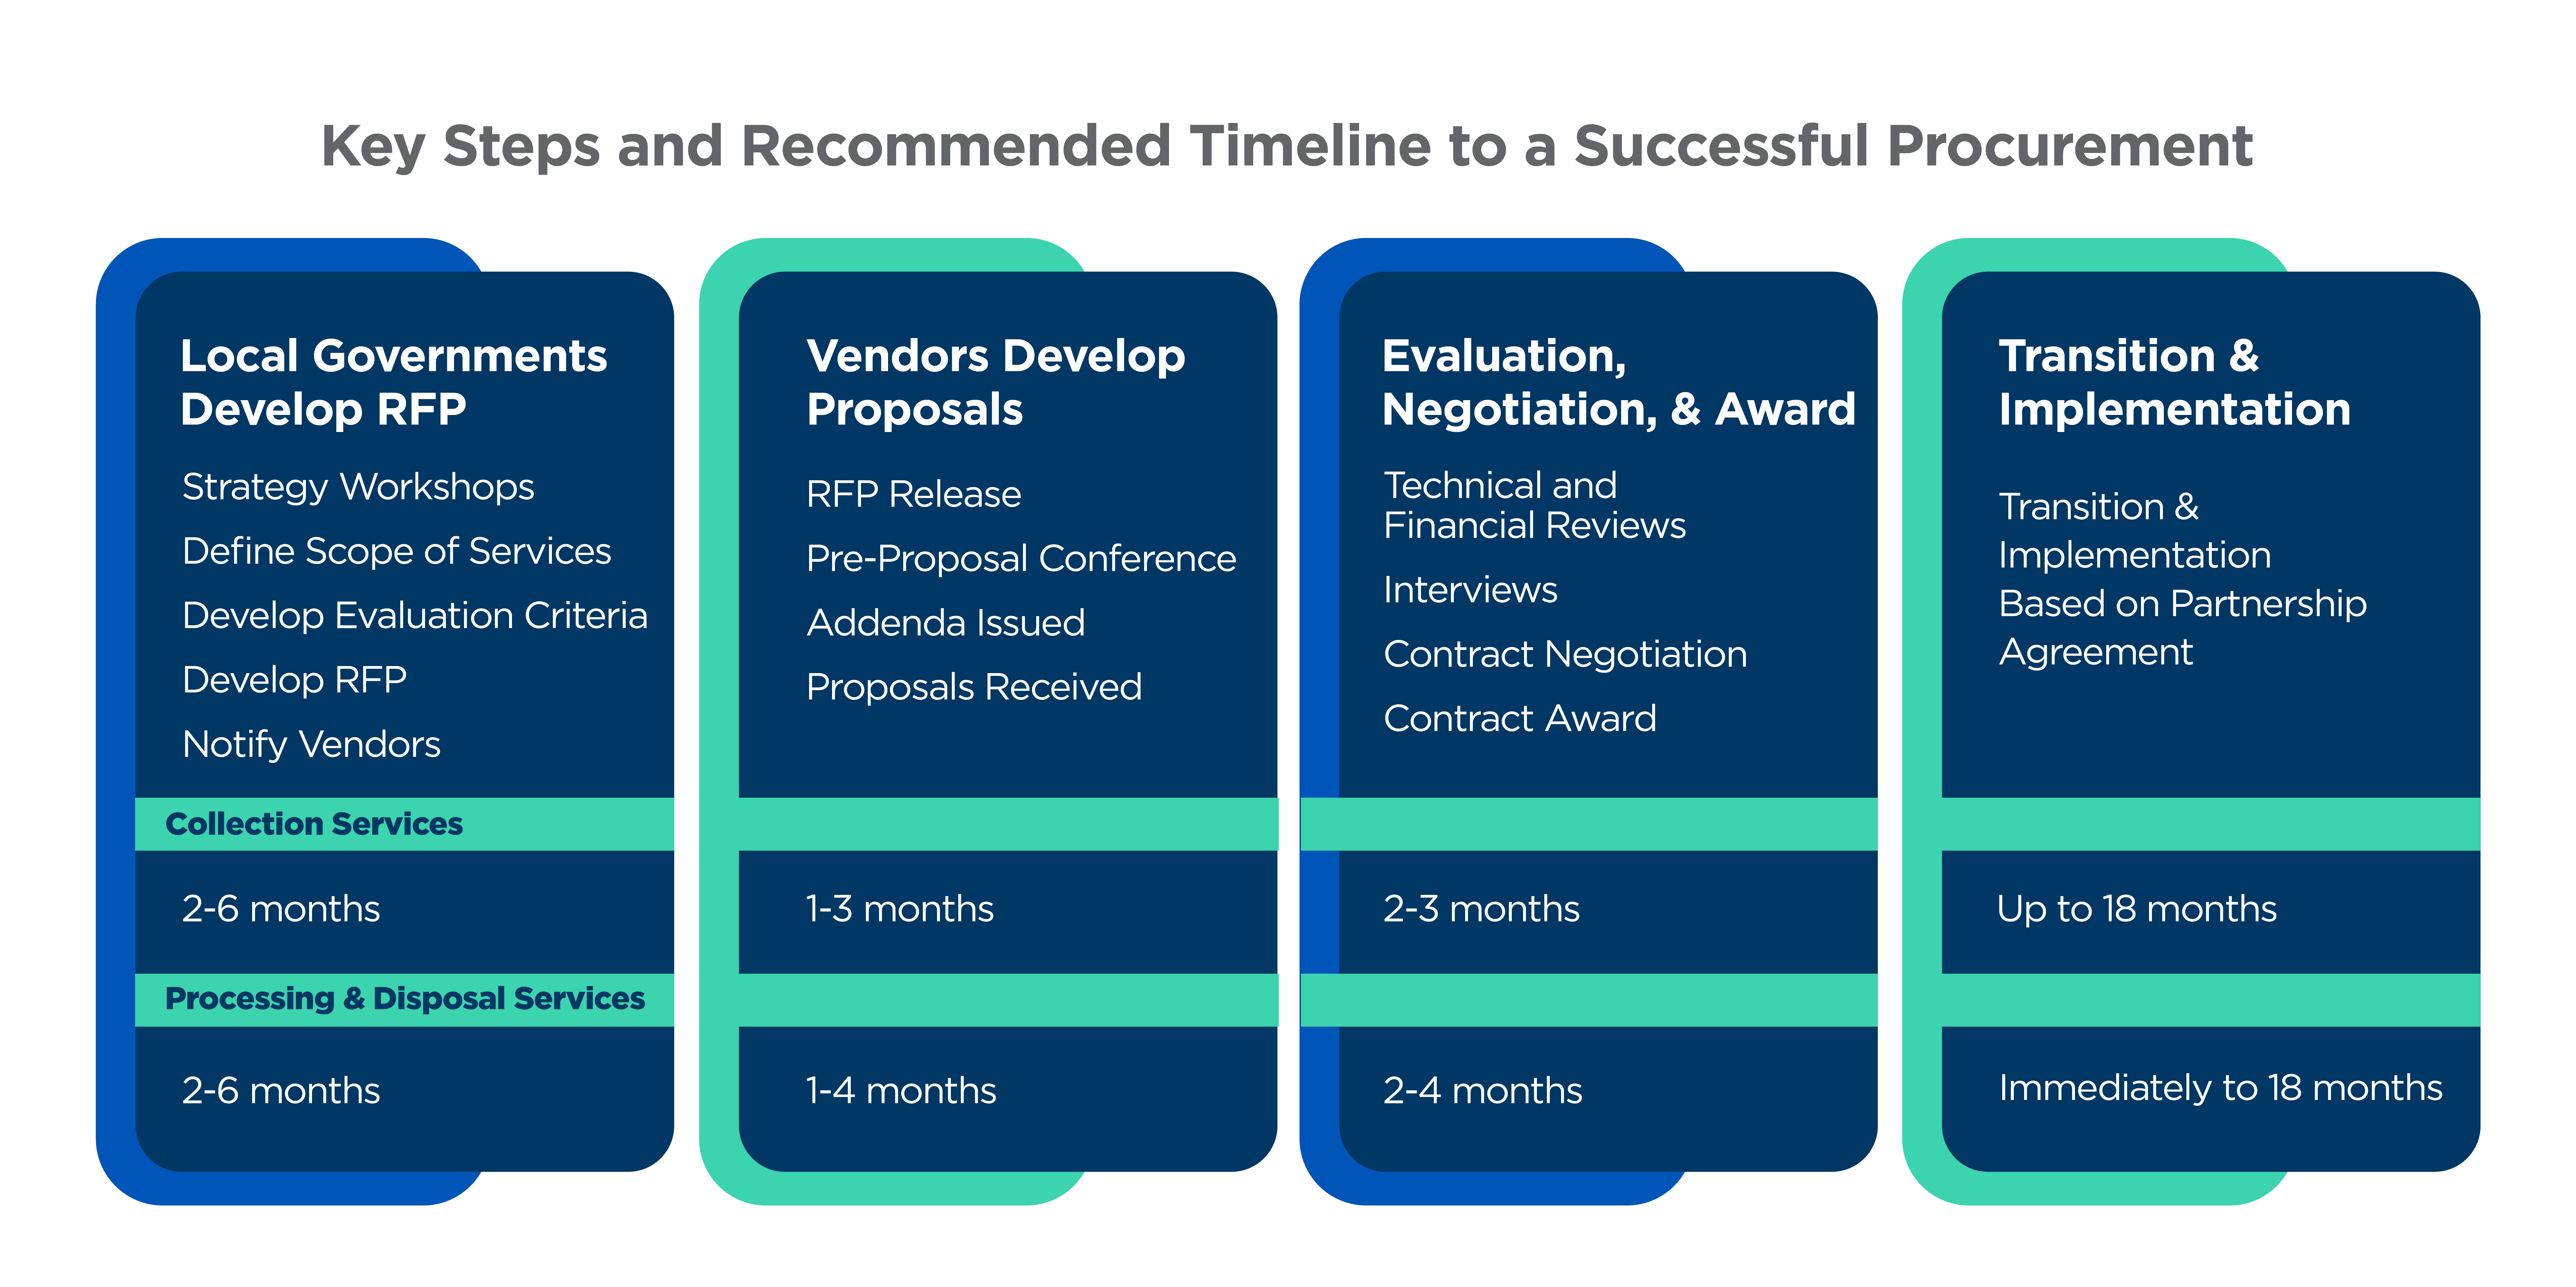 Key-Steps-Recommended-Timeline-to-Successful-Procurement-82722-Graphic